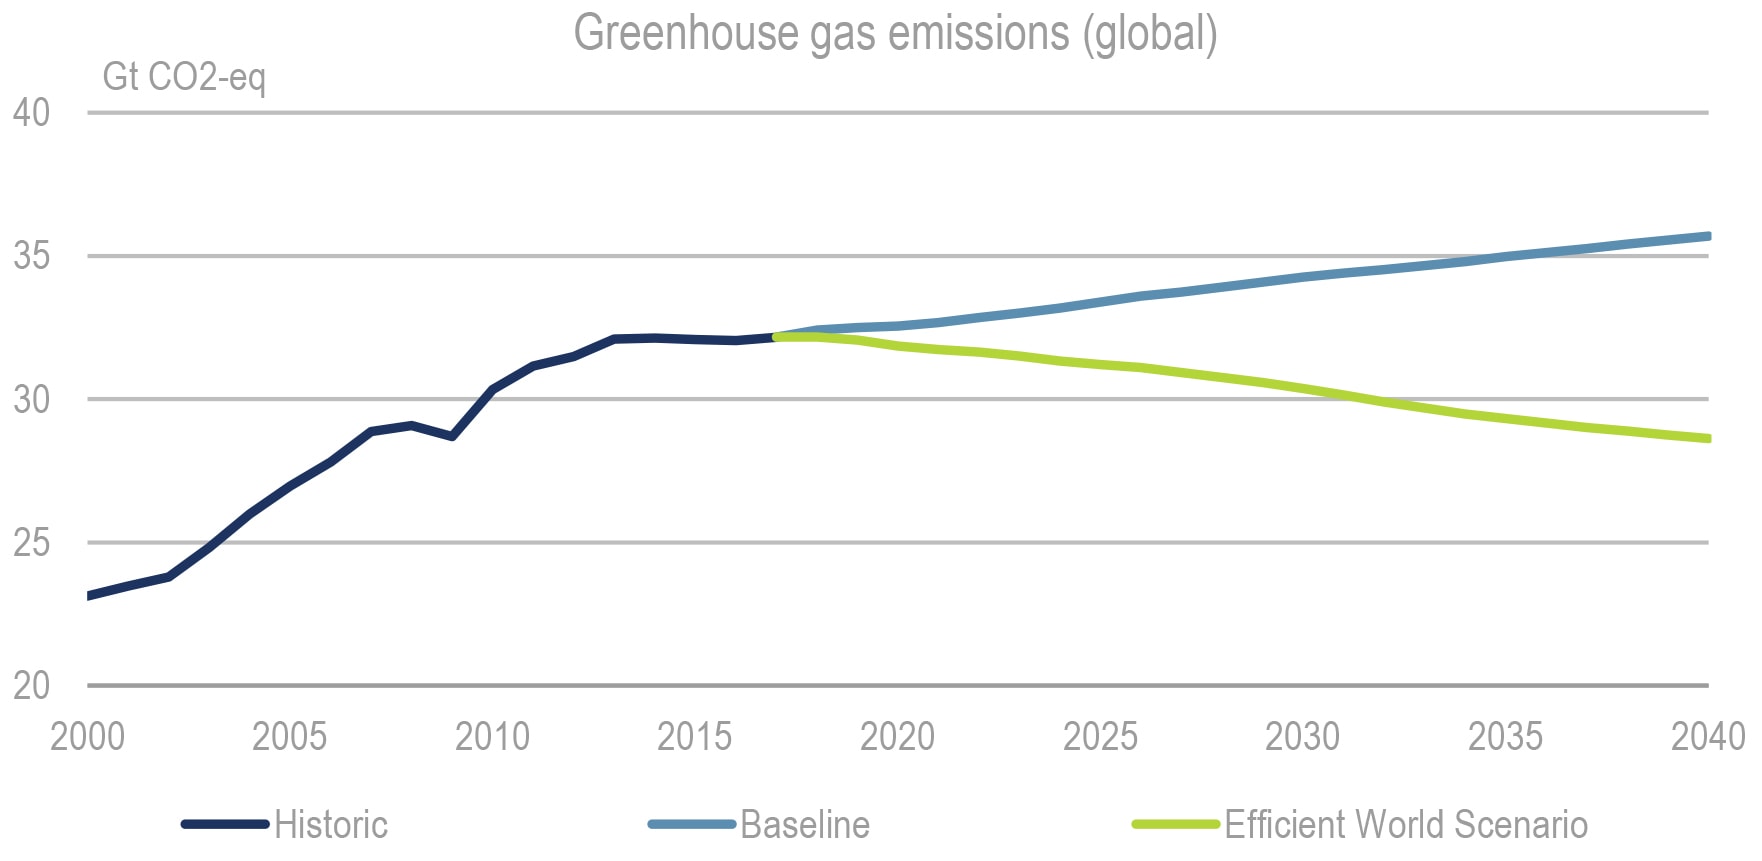 Greenhouse emissions in the EWS, 2000-40